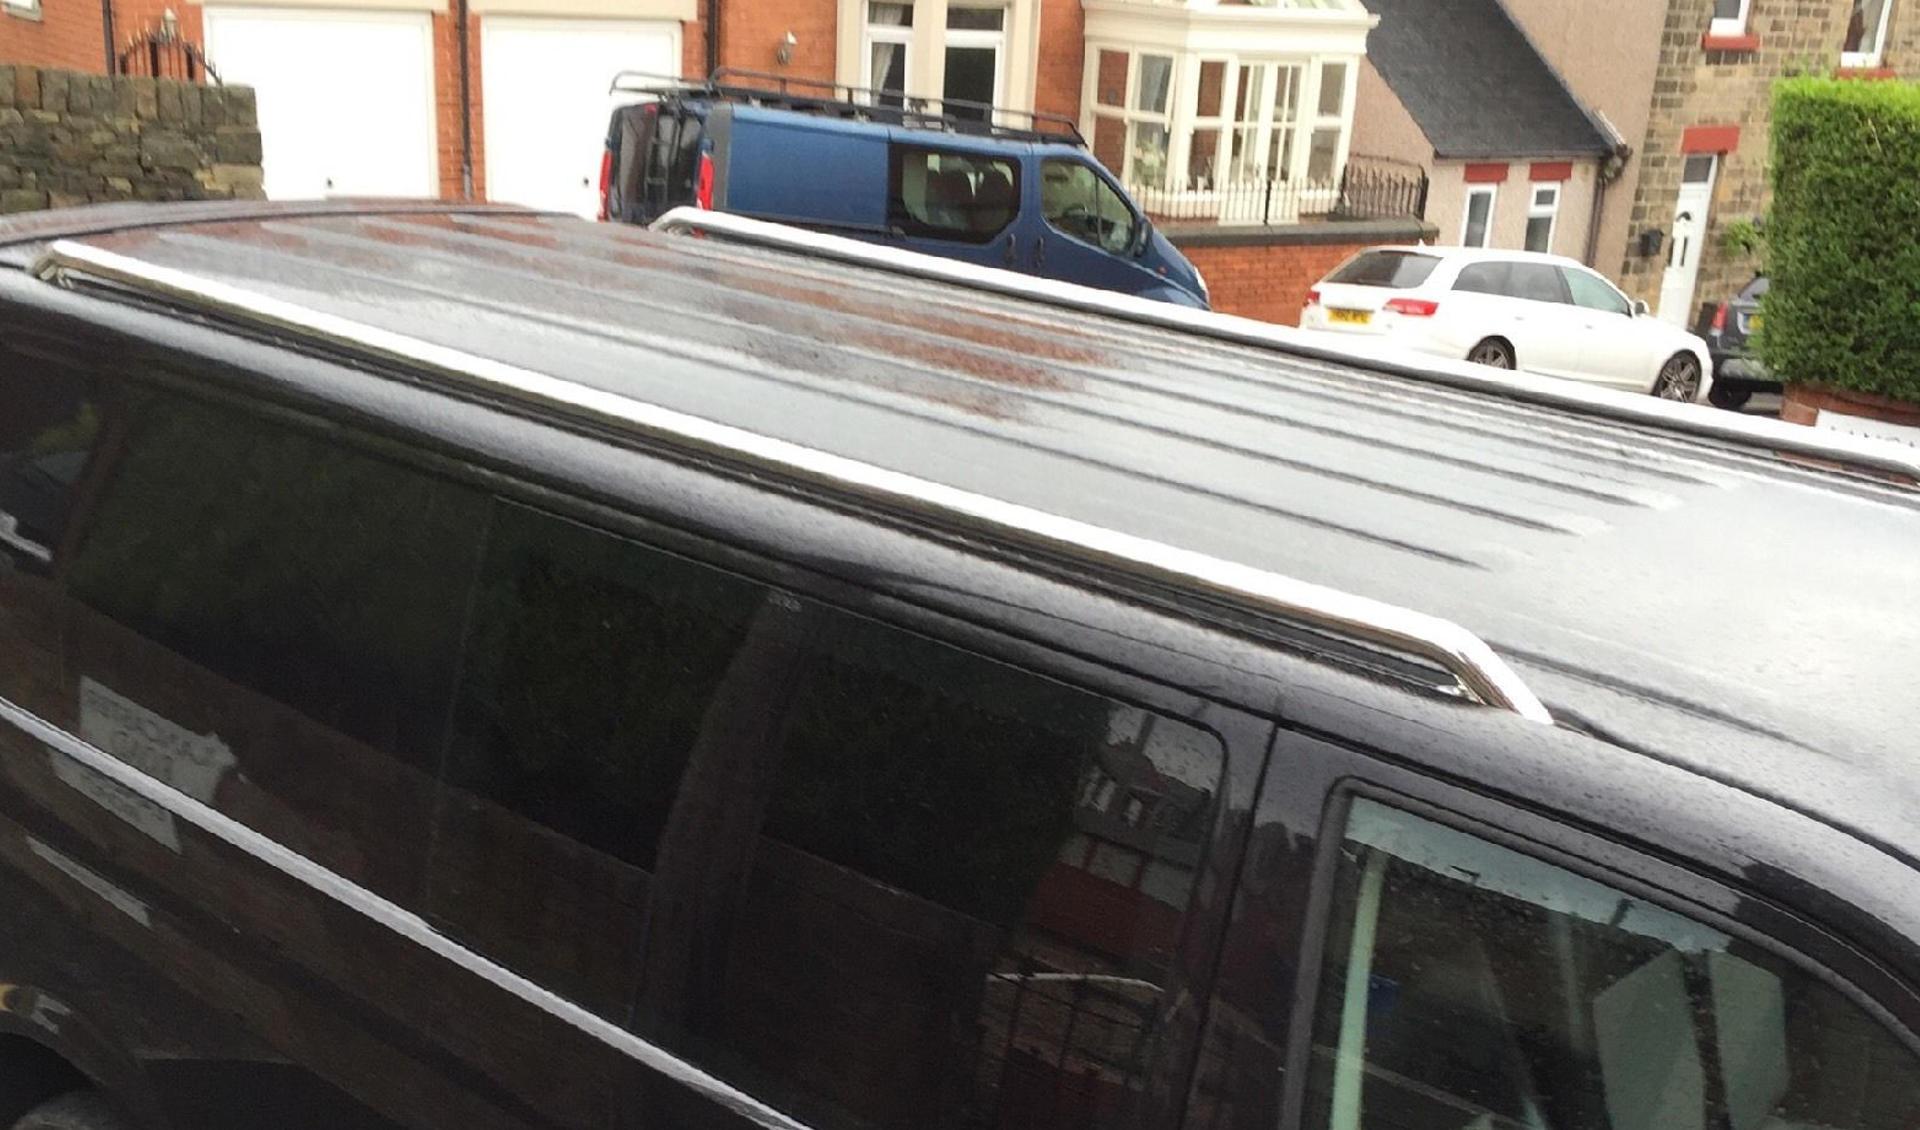 Stainless Steel OE Style Roof Rails for the Volkswagen Transporter T6 LWB -  - sold by Direct4x4